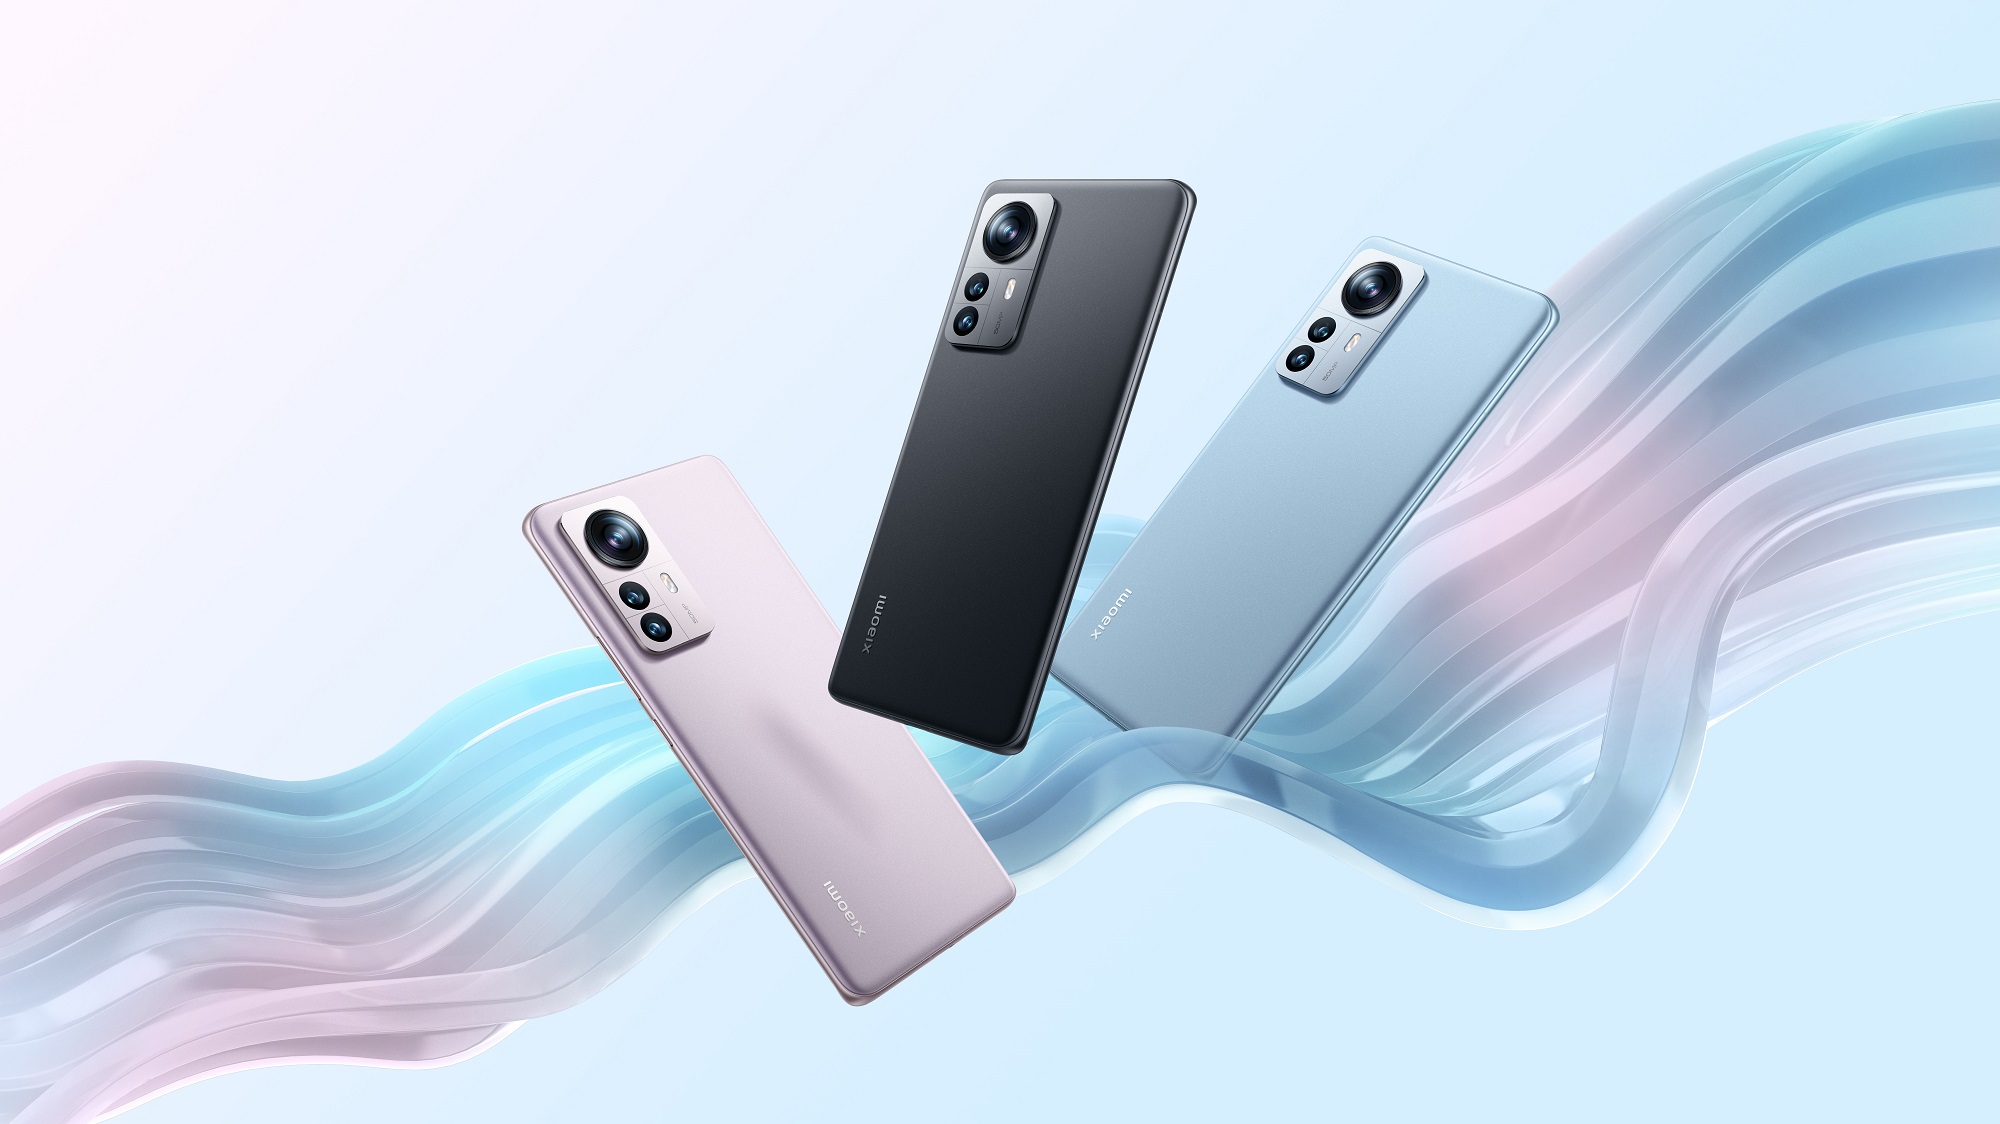 Xiaomi 12 Pro goes on sale in India today